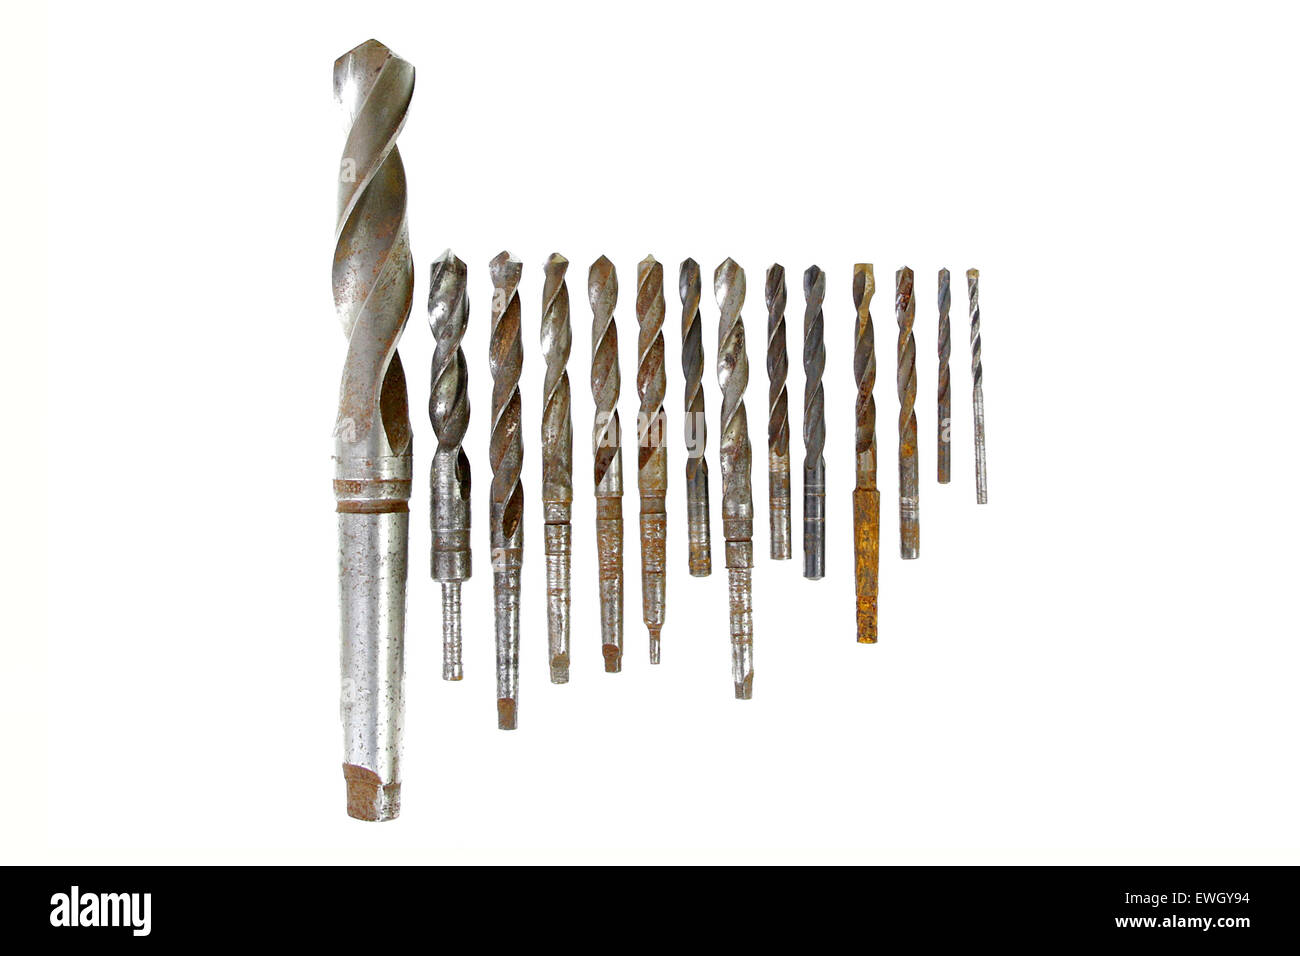 leader group of vintage rusted drill bits metal wood on white background Stock Photo